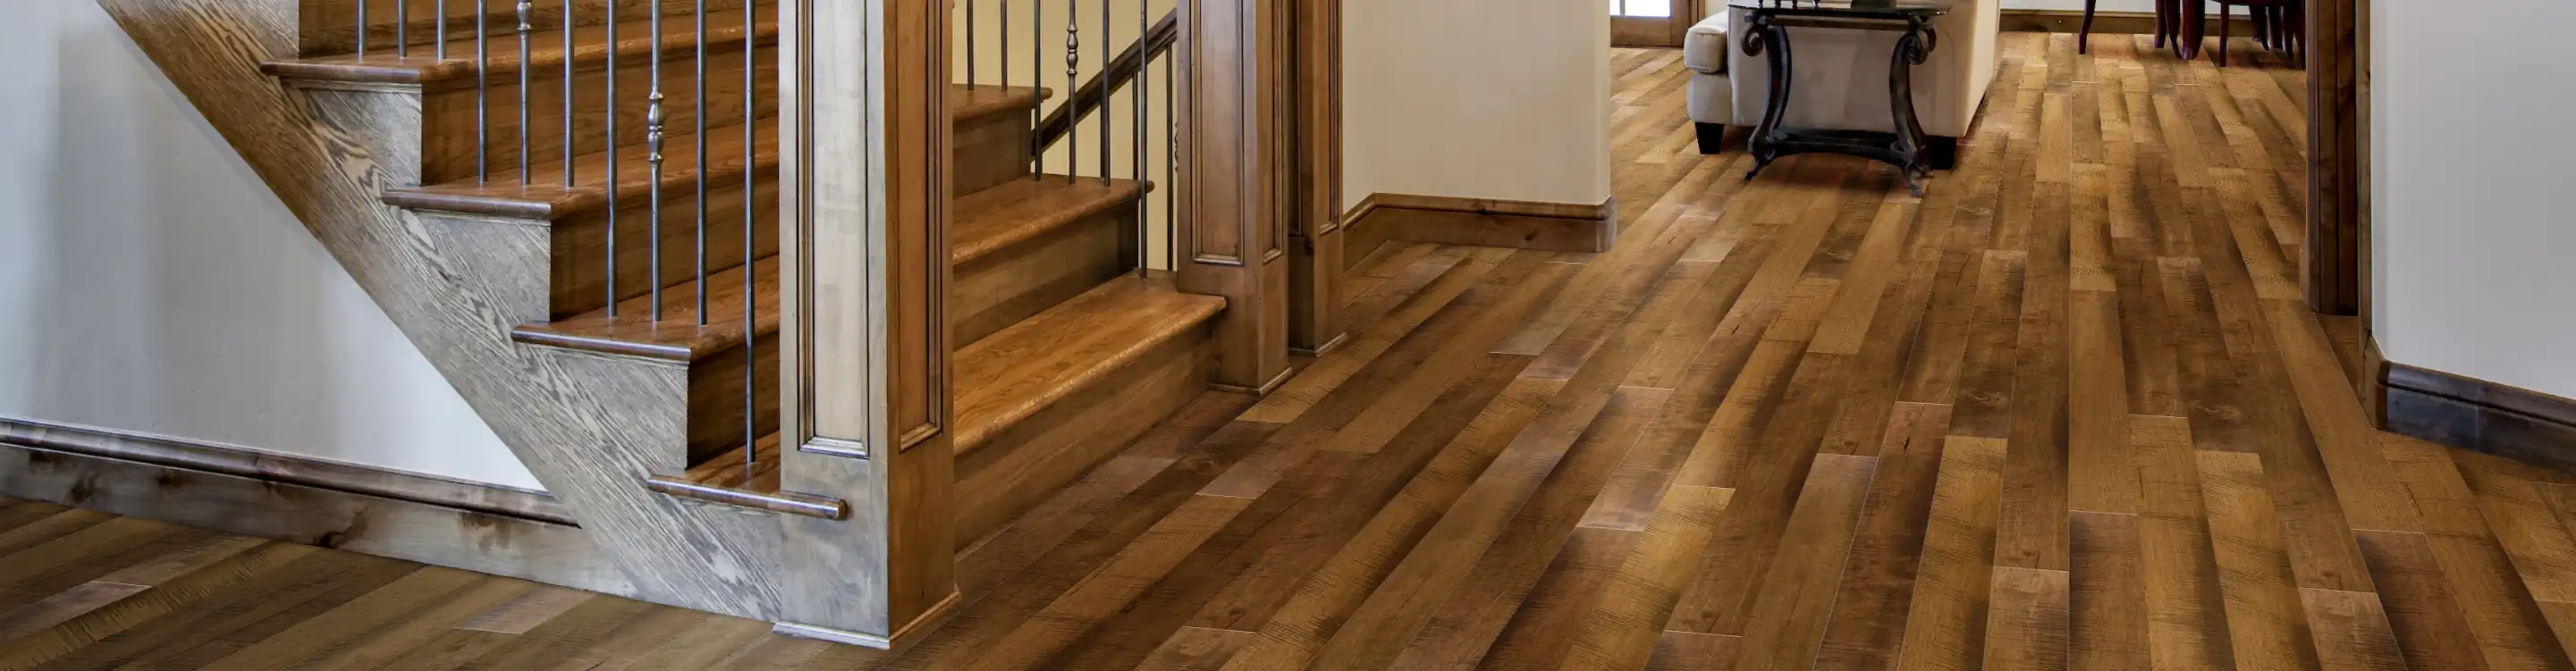 Dark, freshly stained hardwood flooring in entryway with staircase. 